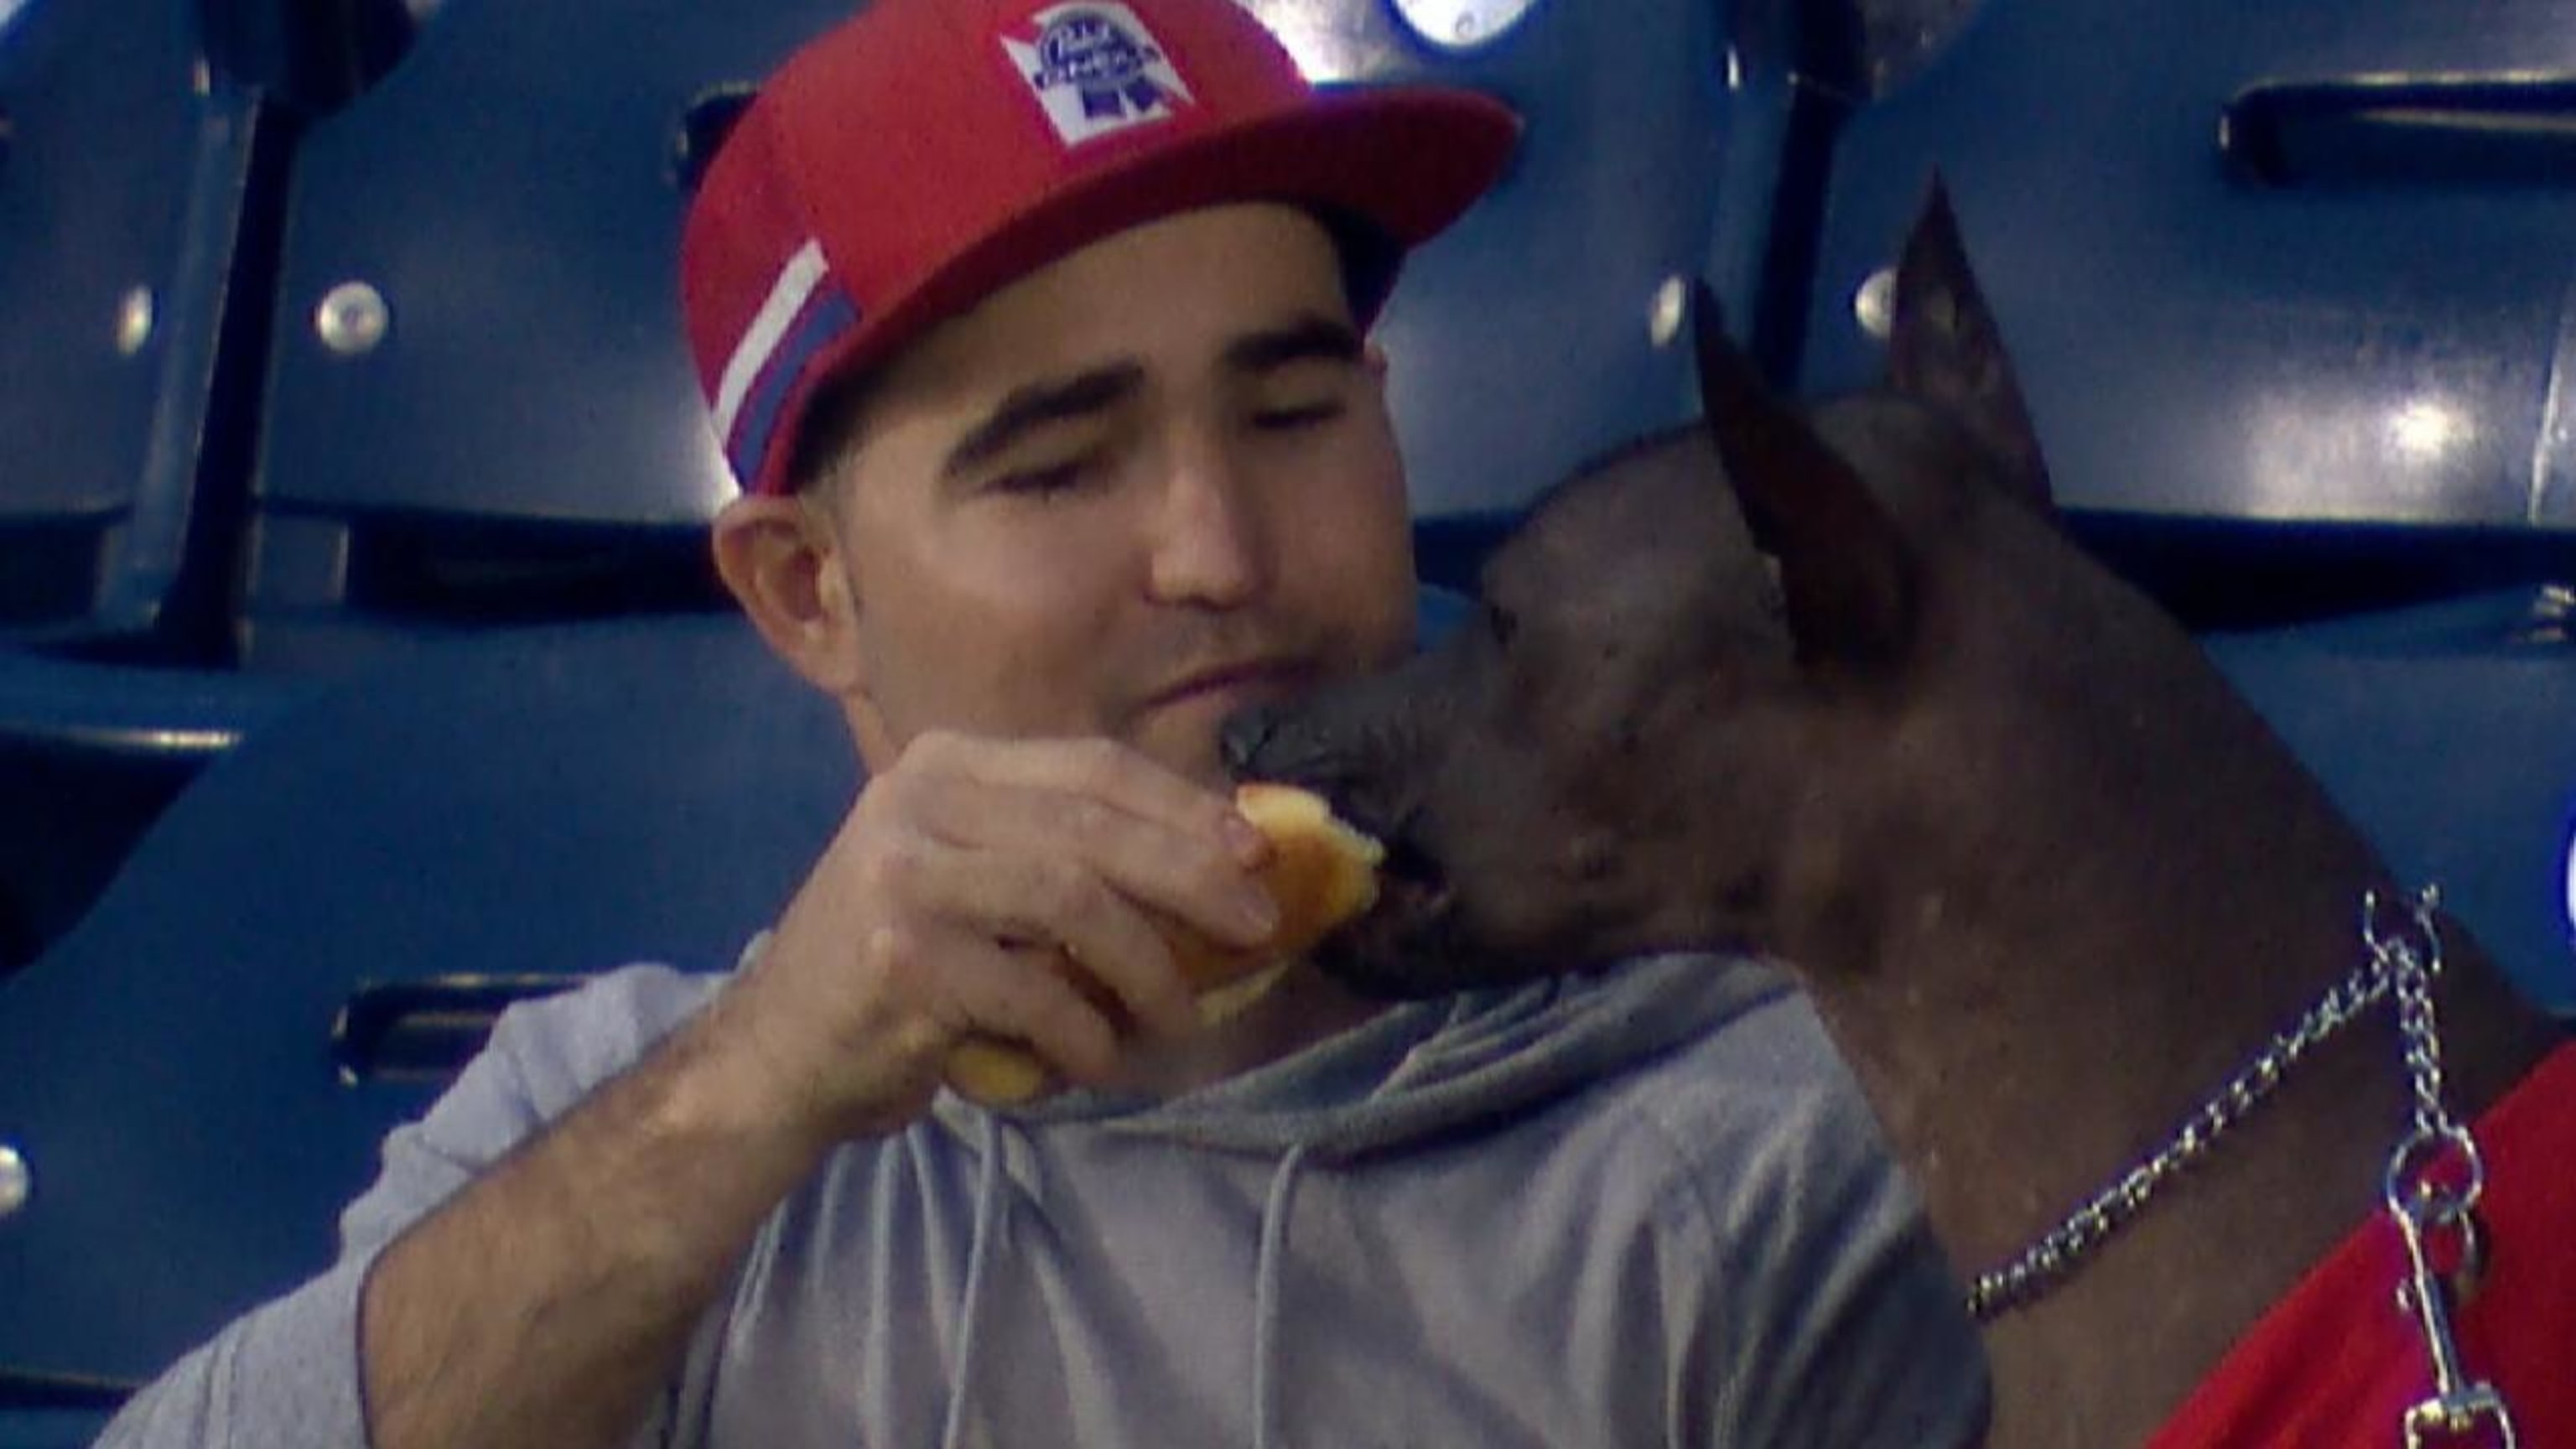 A good dog took in a Nationals game while eating a hot dog 